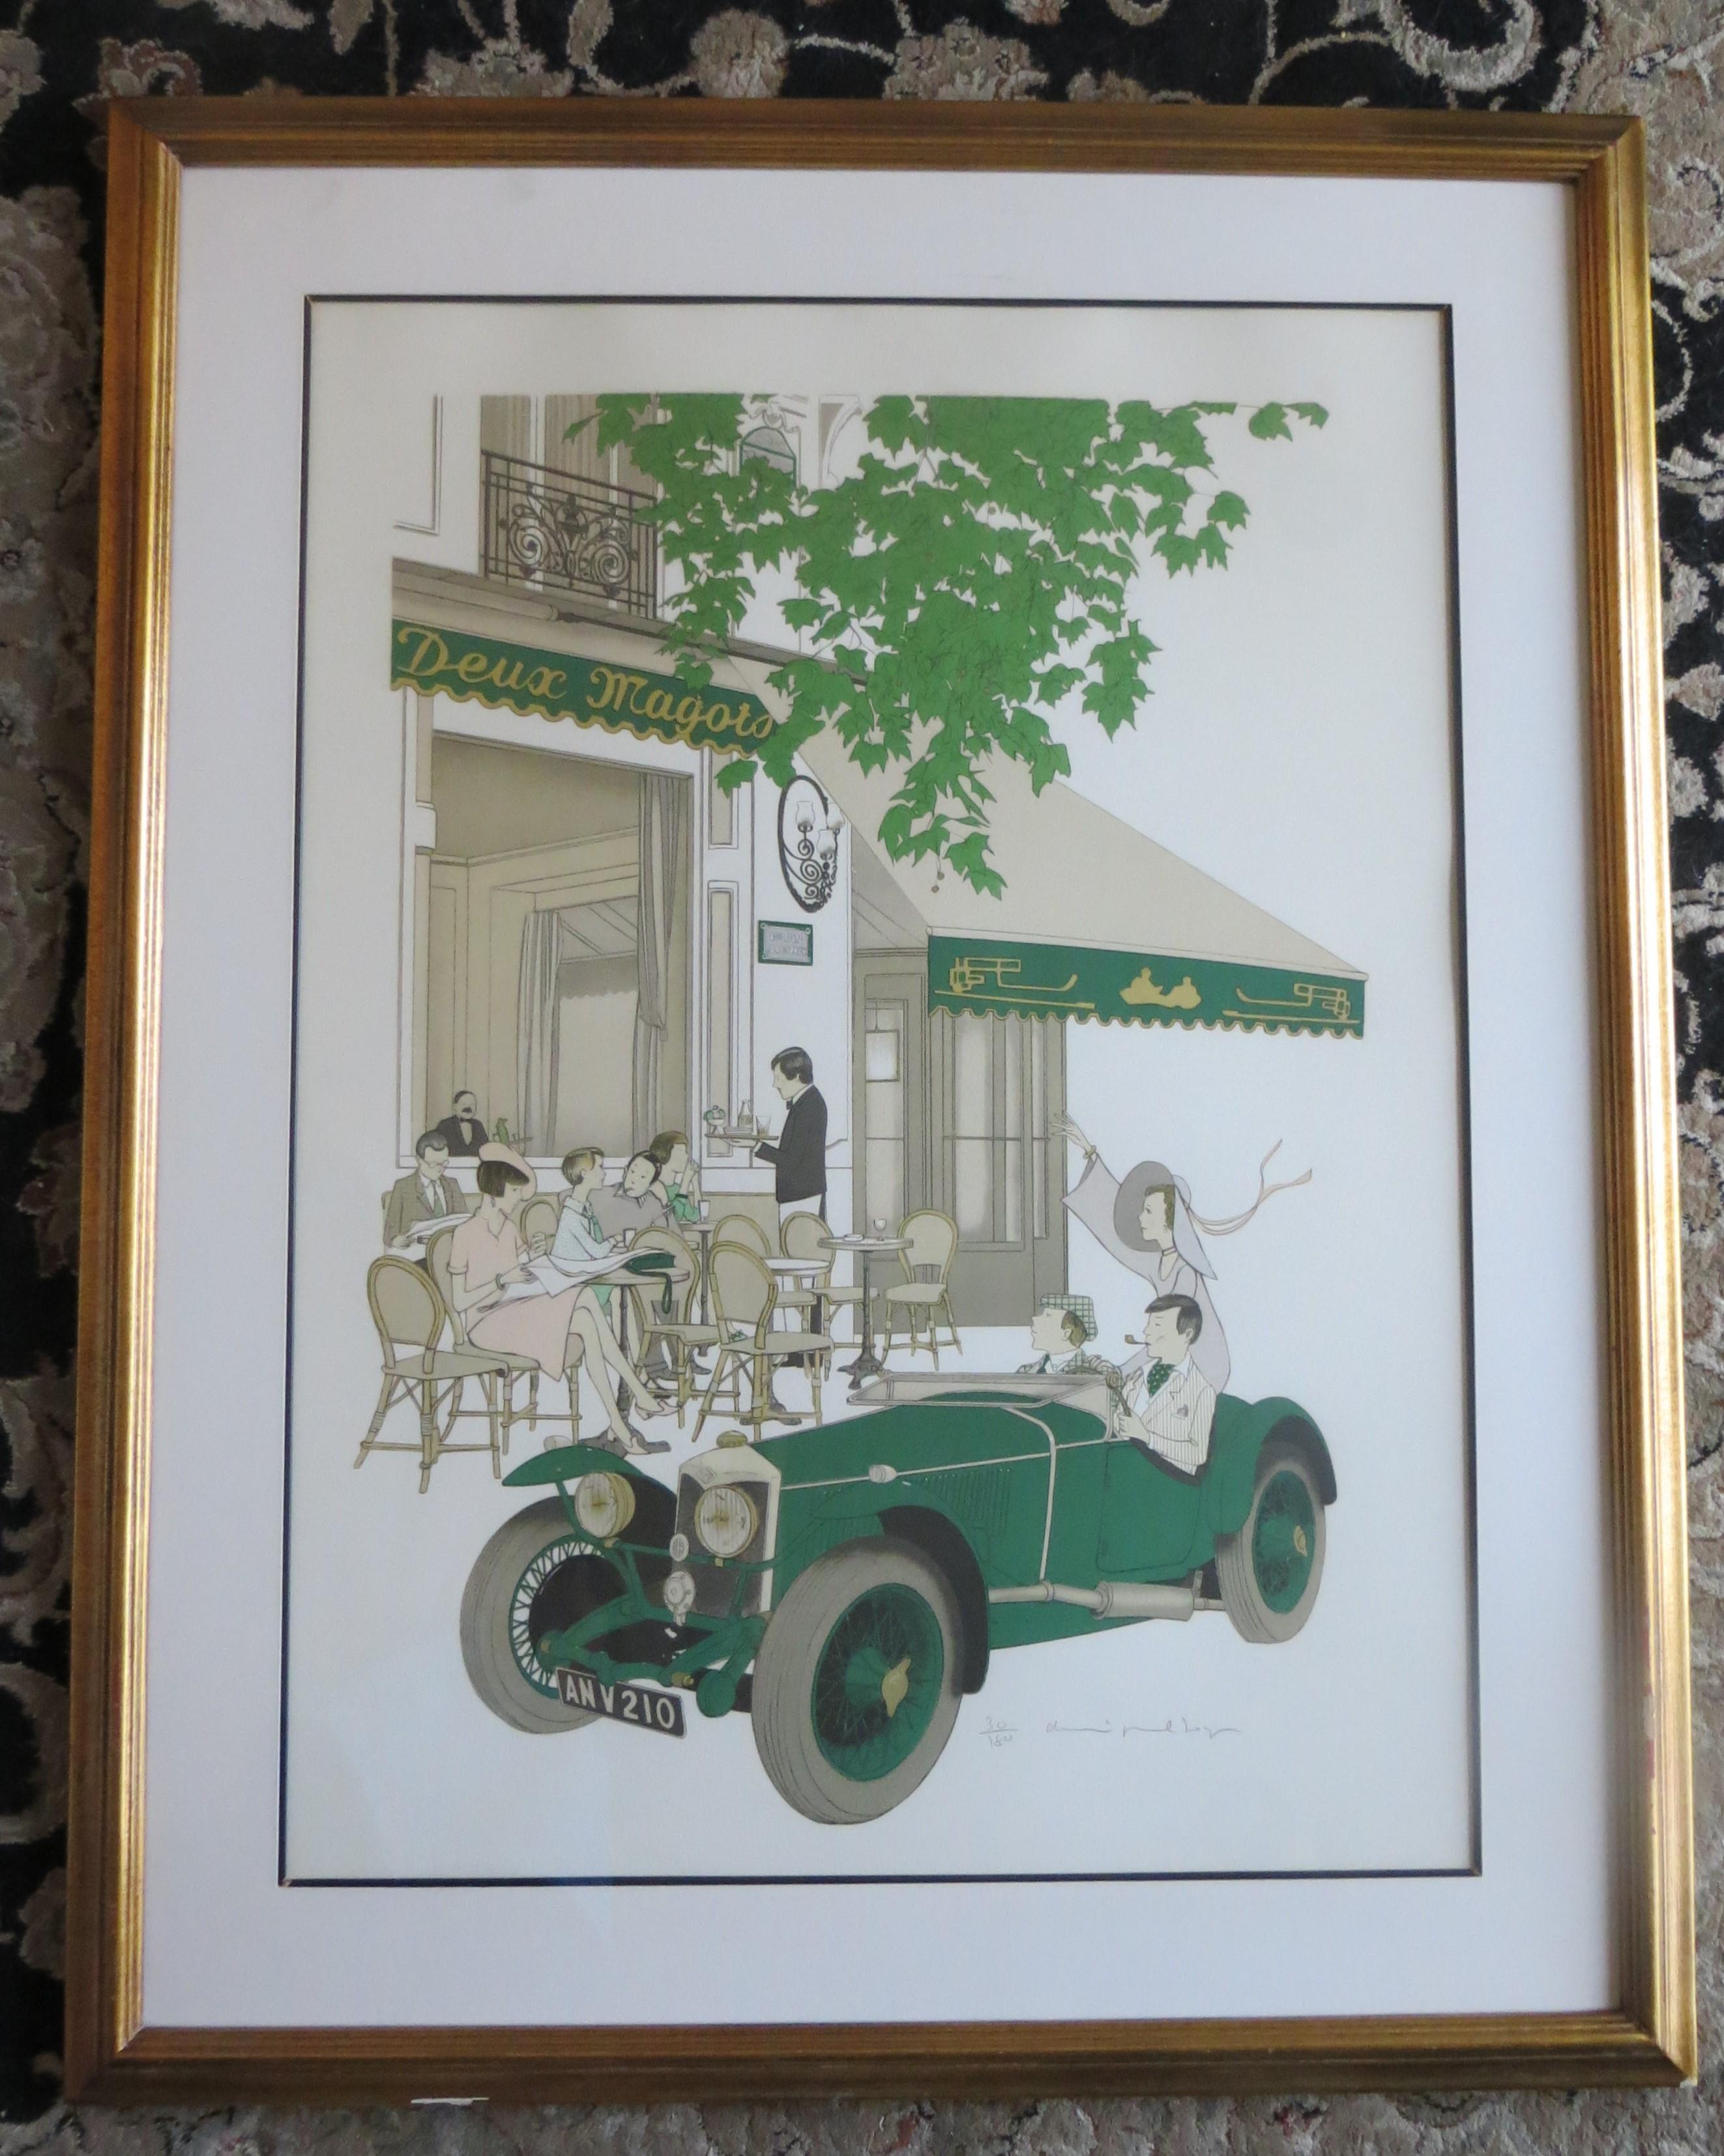 Original Limited Edition Lithograph on Arches paper, 1979. Edition Size: 220, plus proofs.  Signed & numbered 30/150  in pencil. Excellent Condition;
Denis Paul Noyer, son of famed artist Philippe Noyer, has distinguished himself as a painter,